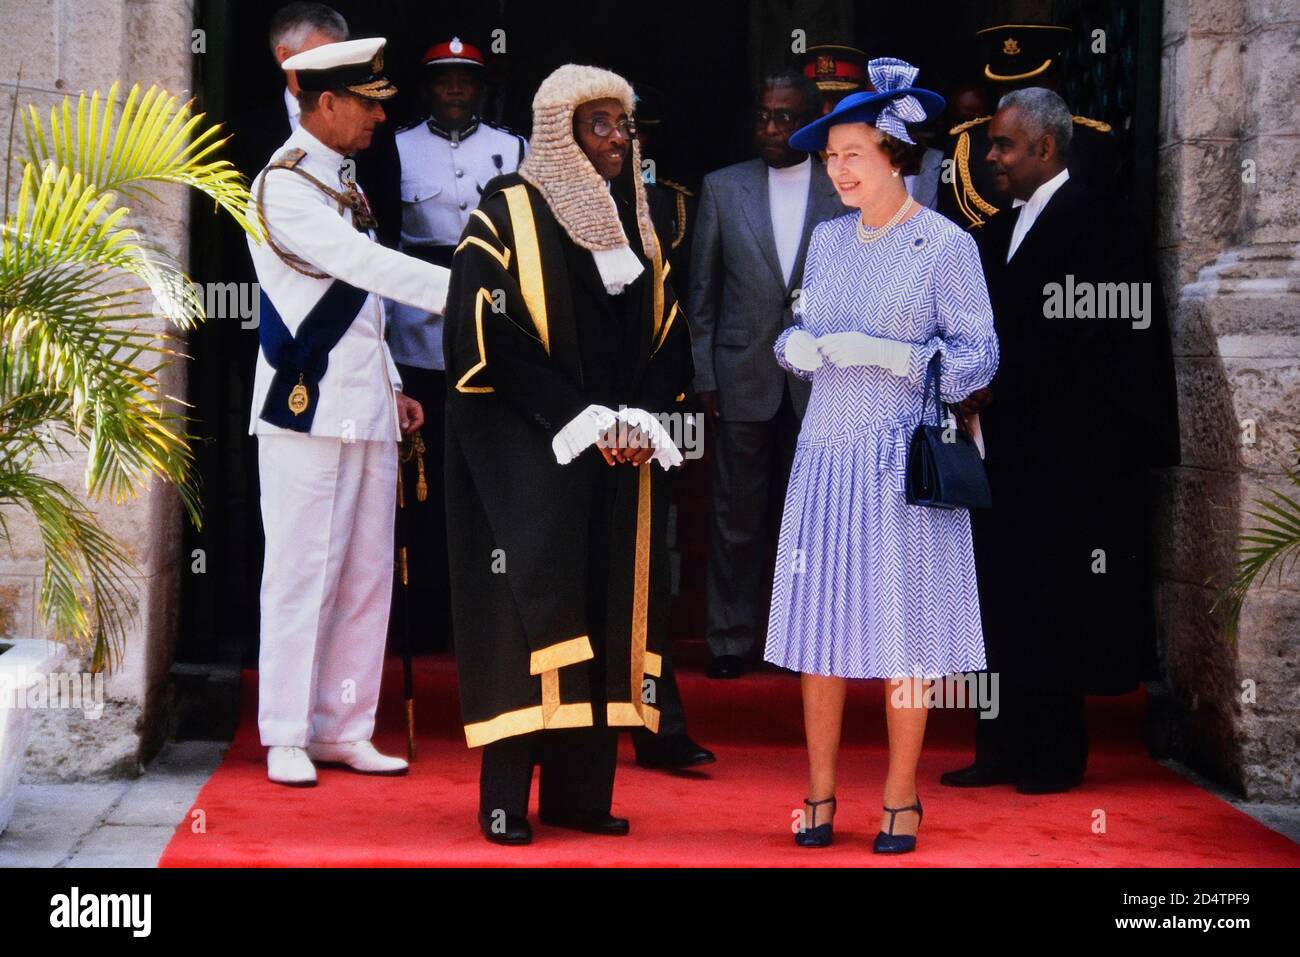 A smiling HM Queen Elizabeth II and Prince Philip accompanied by the Speaker of the House, Lawson Weekes, on a royal visit to mark the 350th anniversary of the Barbados Parliament, Bridgetown. 8-11th March 1989 Stock Photo